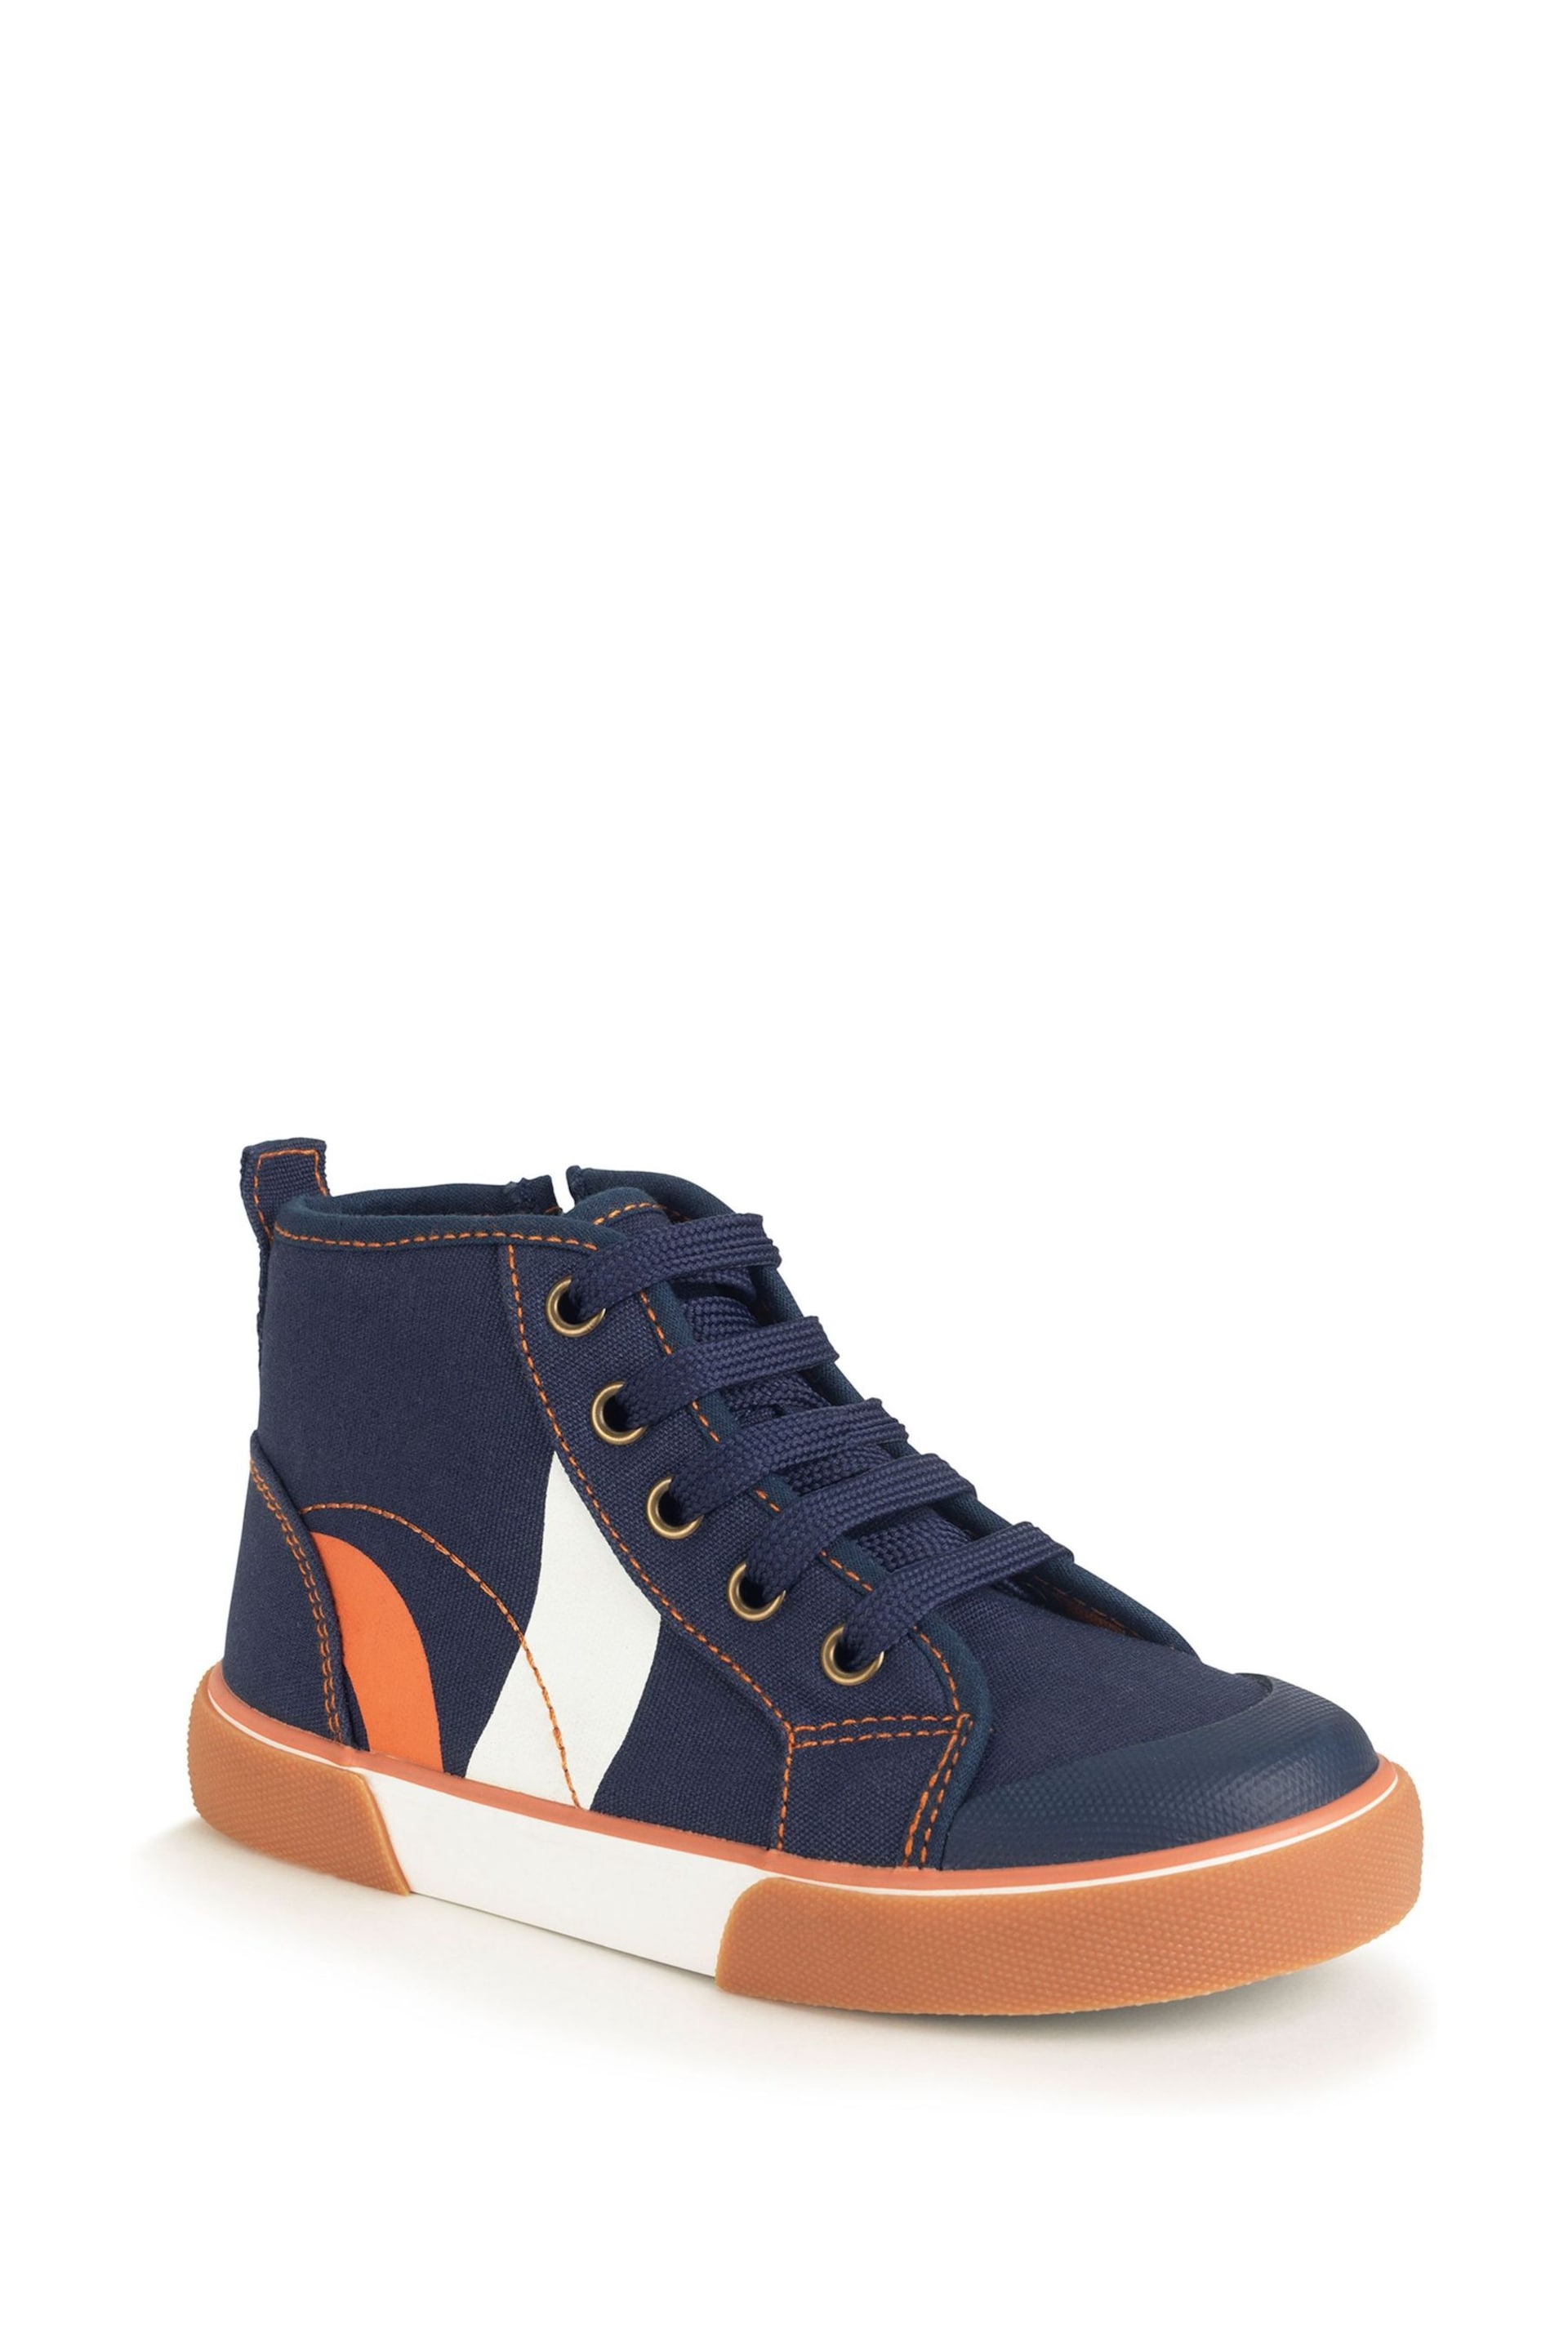 Start Rite Arcade Blue Canvas High-top Zip Up Trainers - Image 3 of 6